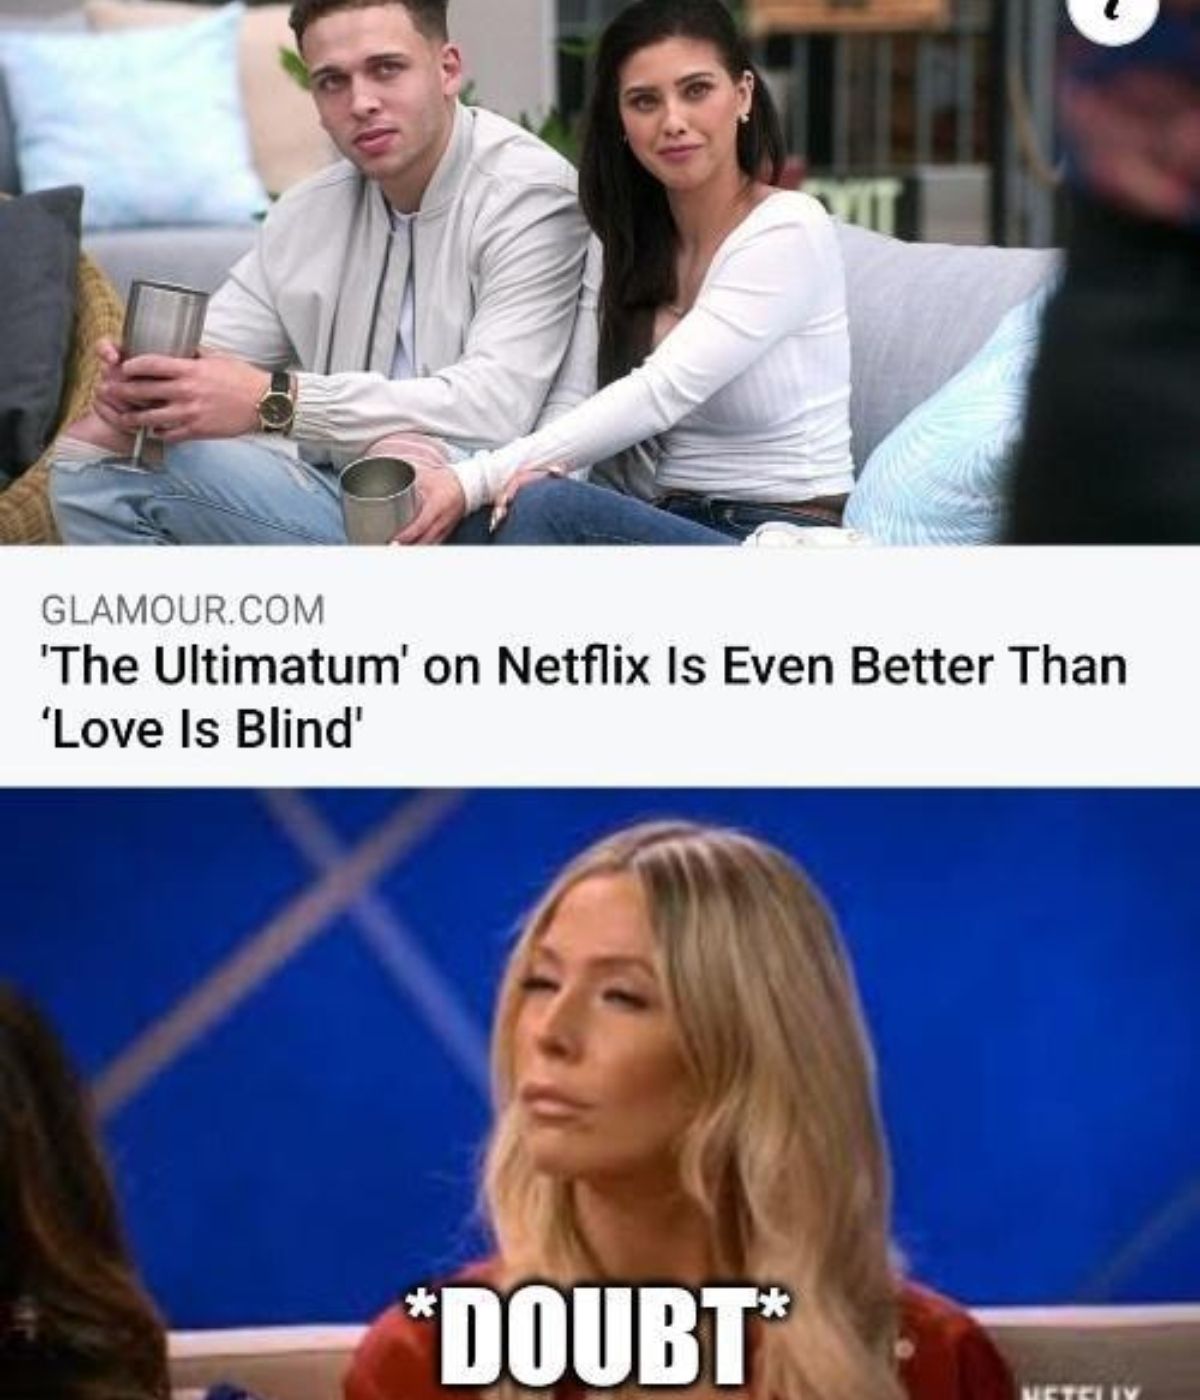 A meme about Netflix reality shows The Ultimatum and Love Is Blind